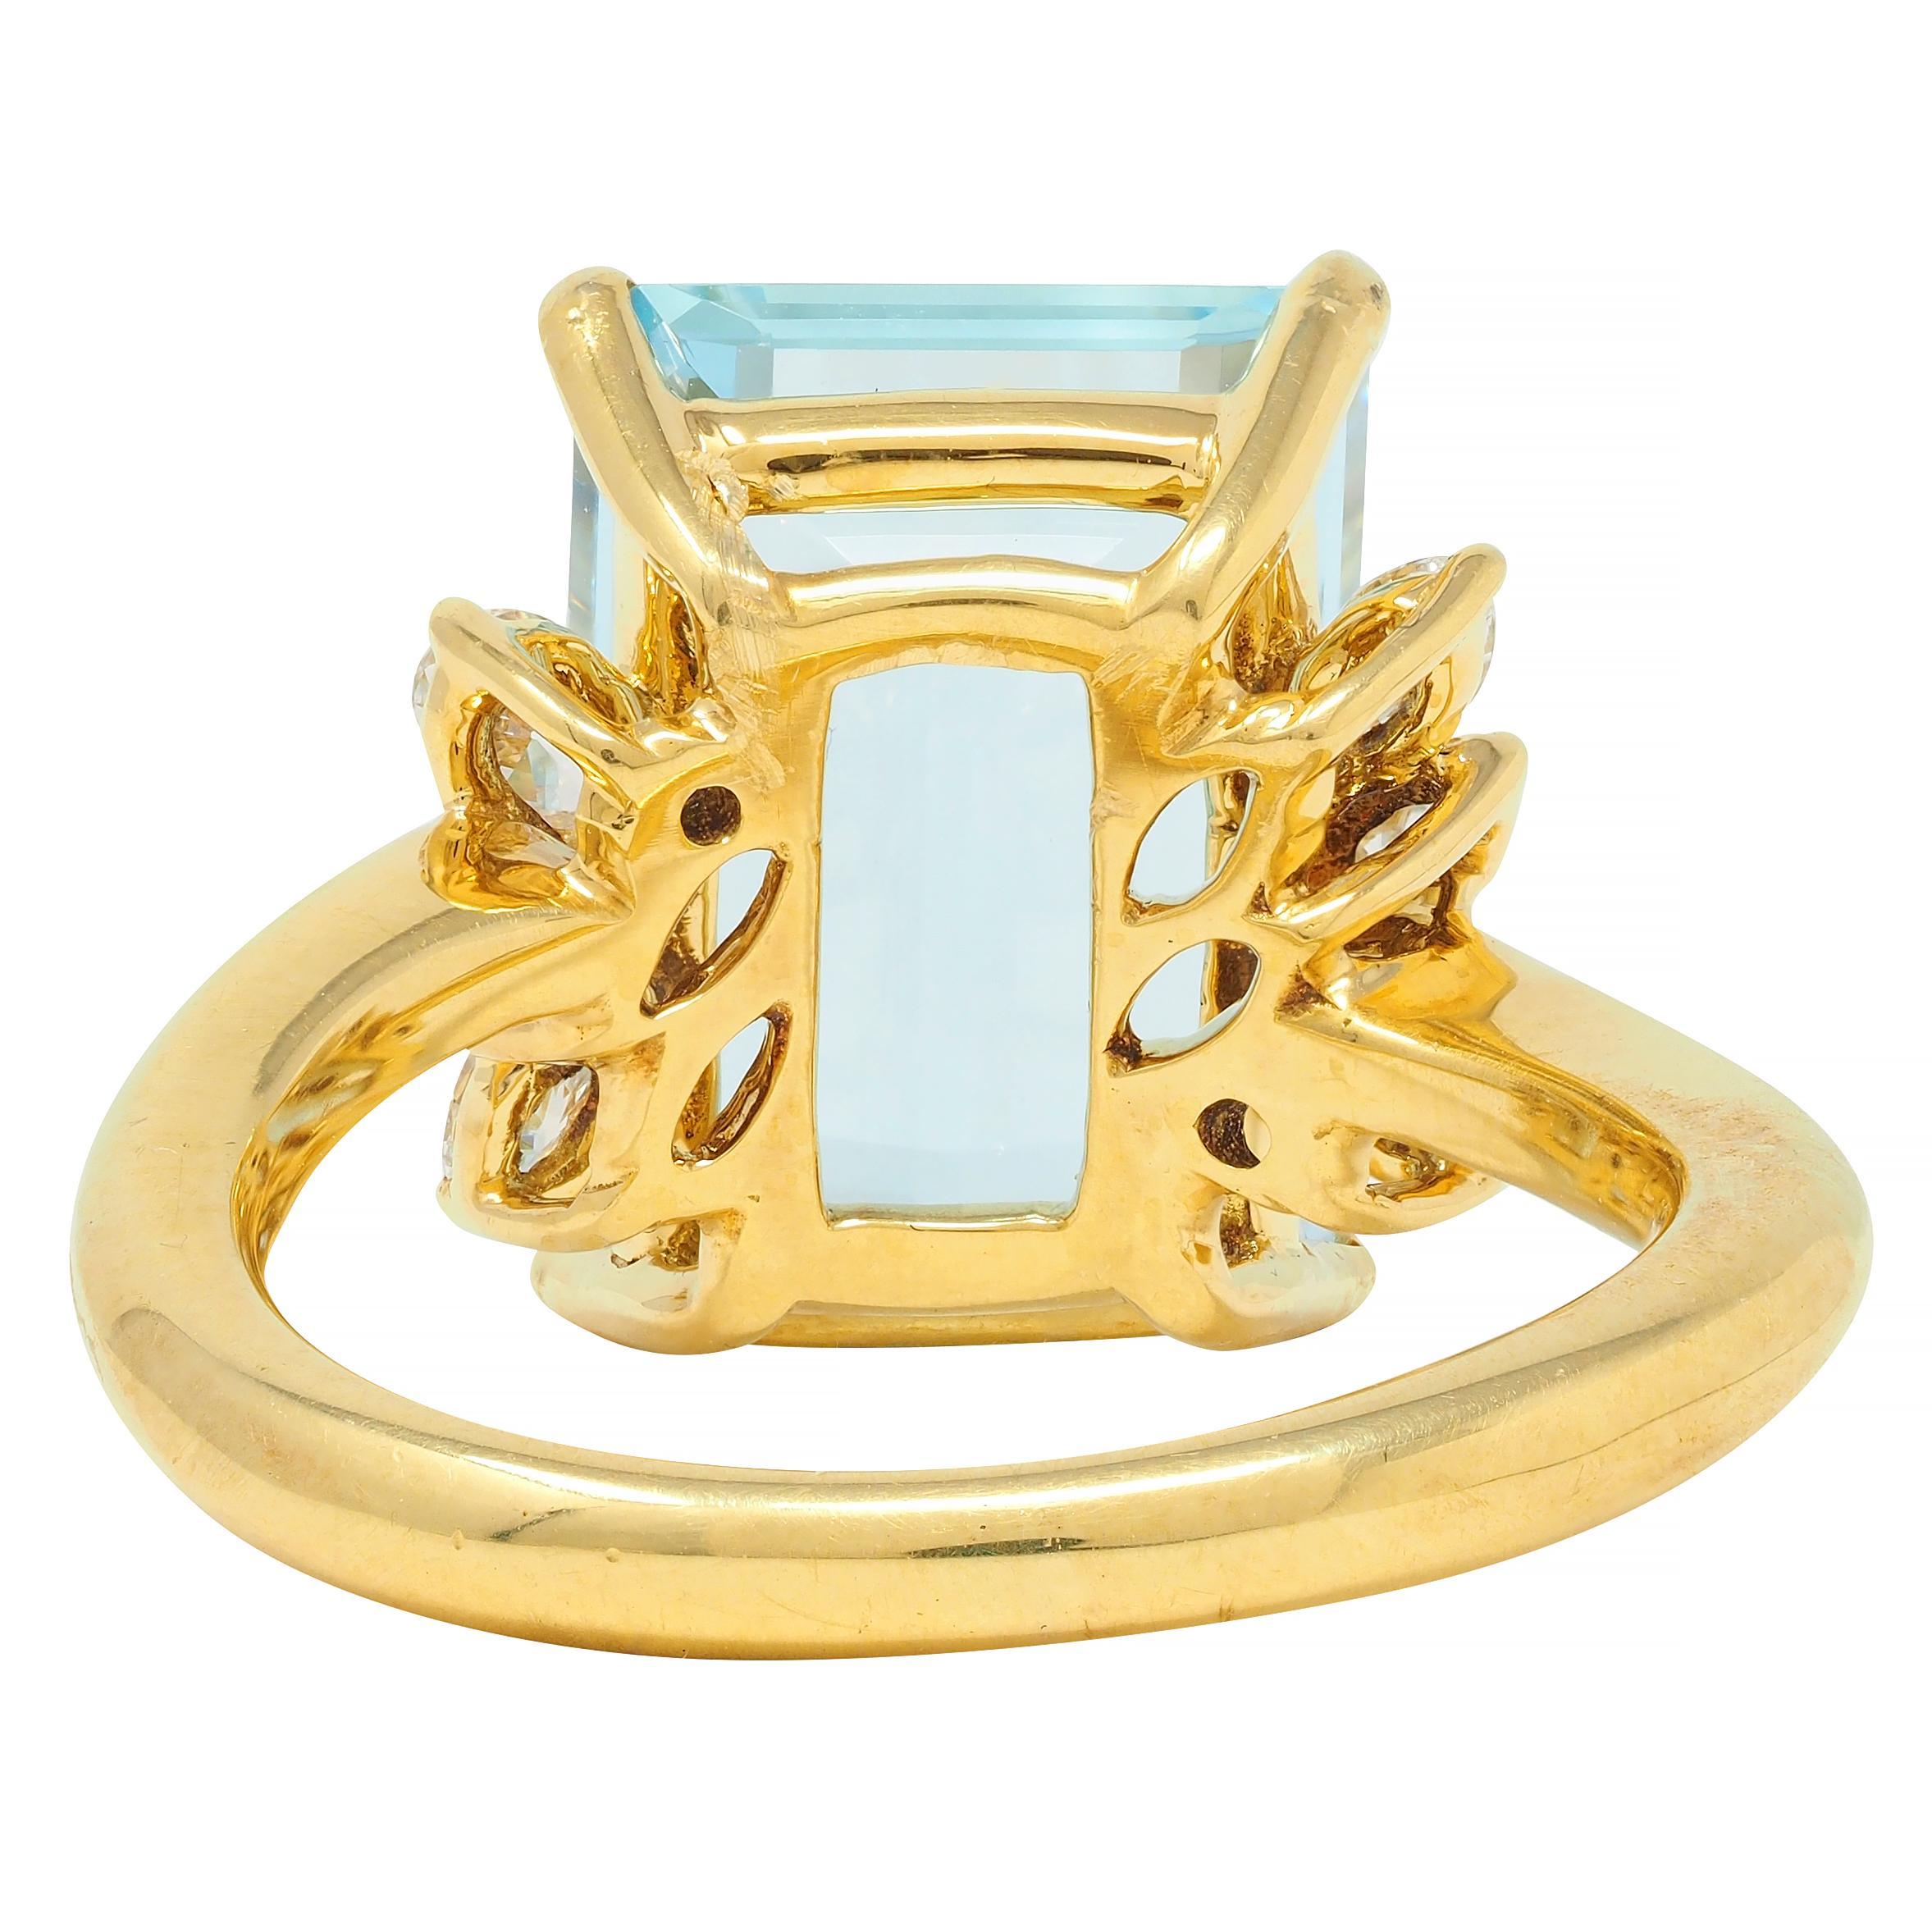 Contemporary 7.27 CTW Aquamarine Diamond 18 Karat Yellow Gold Cocktail Ring In Excellent Condition For Sale In Philadelphia, PA